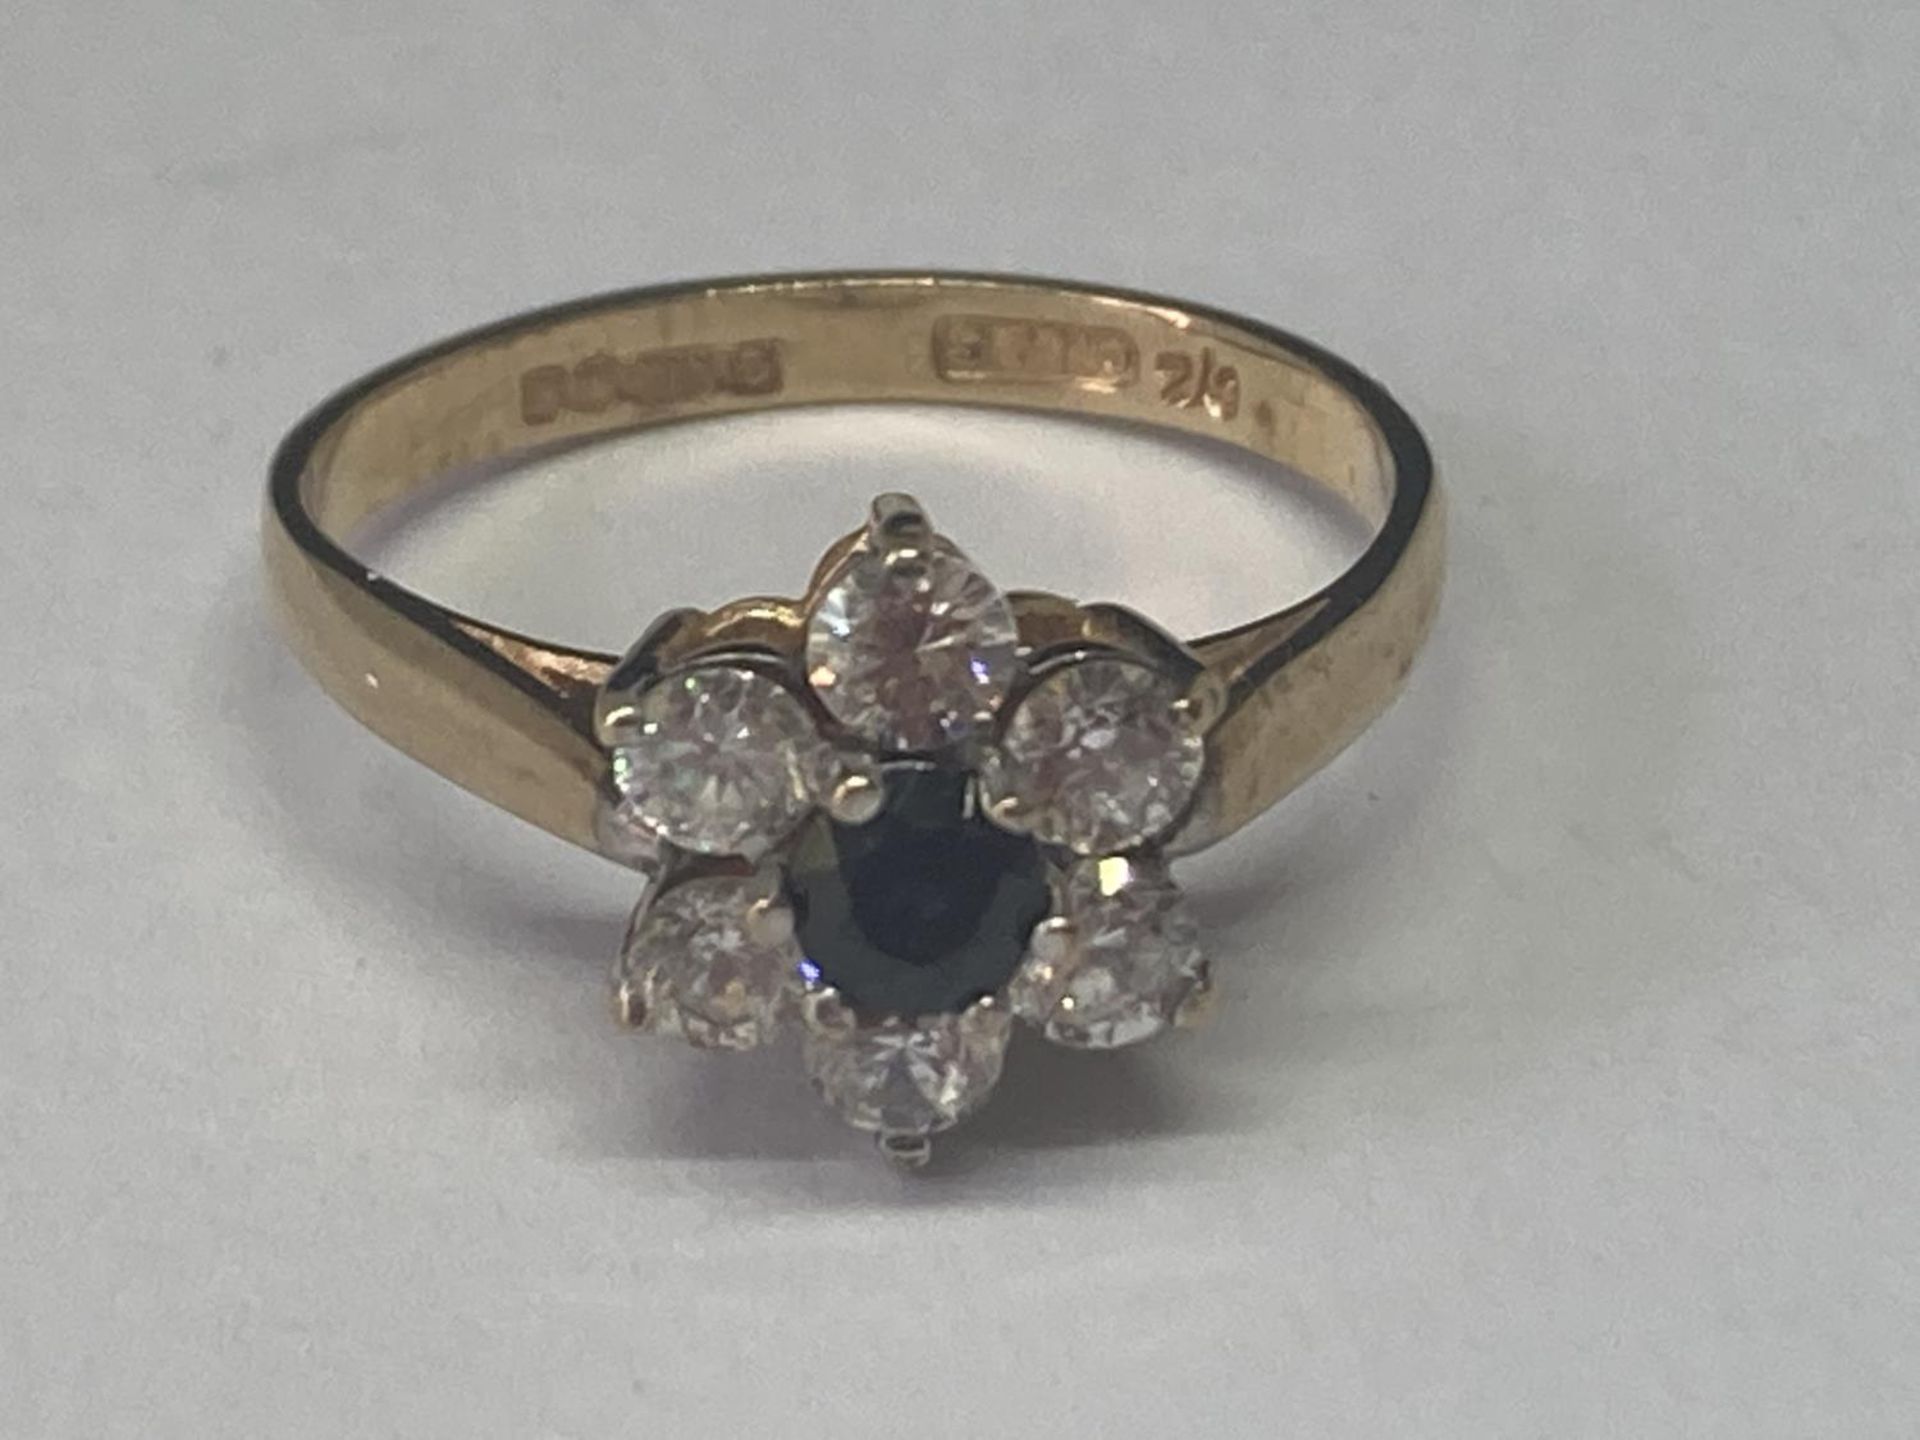 A 9 CARAT GOLD RING WITH A SAPPHIRE SURROUNDED BY CUBIC ZIRCONIAS SIZE N - Image 2 of 6